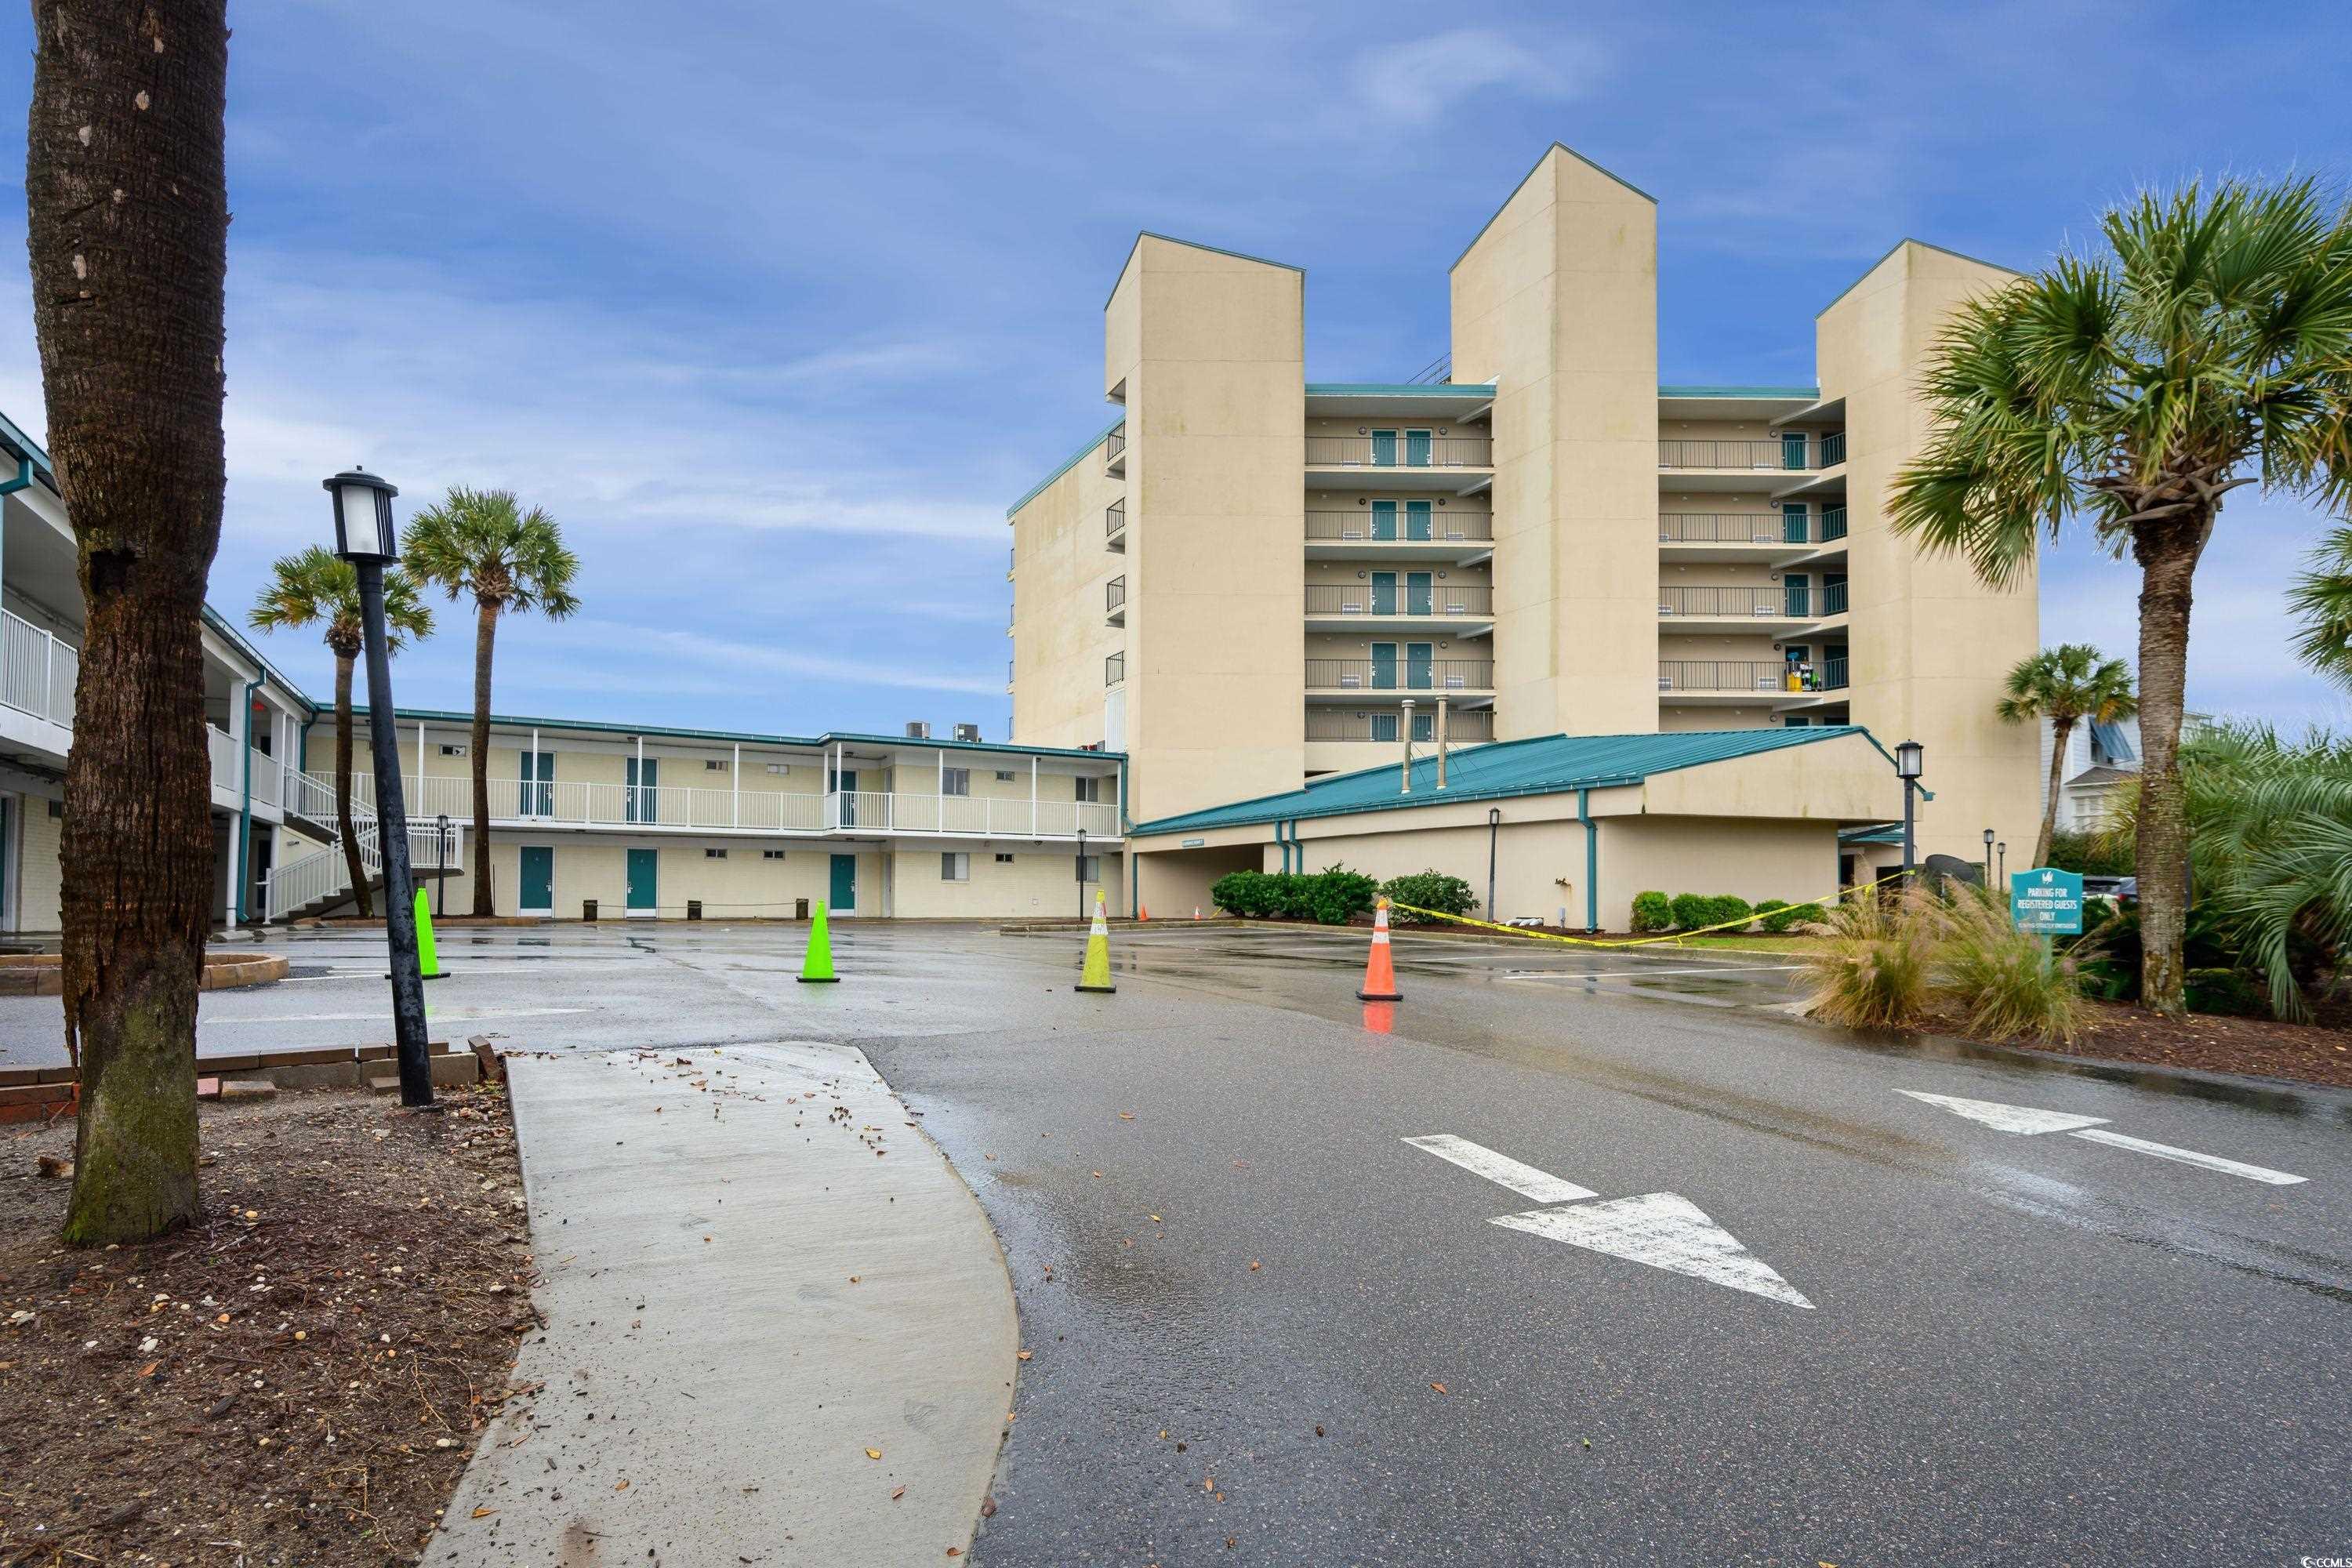 beautiful unit located on the third floor of the tower at the litchfield inn. this unit does have a connecting door to the neighboring unit that is also being sold so you have the opportunity to own two wonderful investment properties. all you need to do is bring your bags and sunscreen!